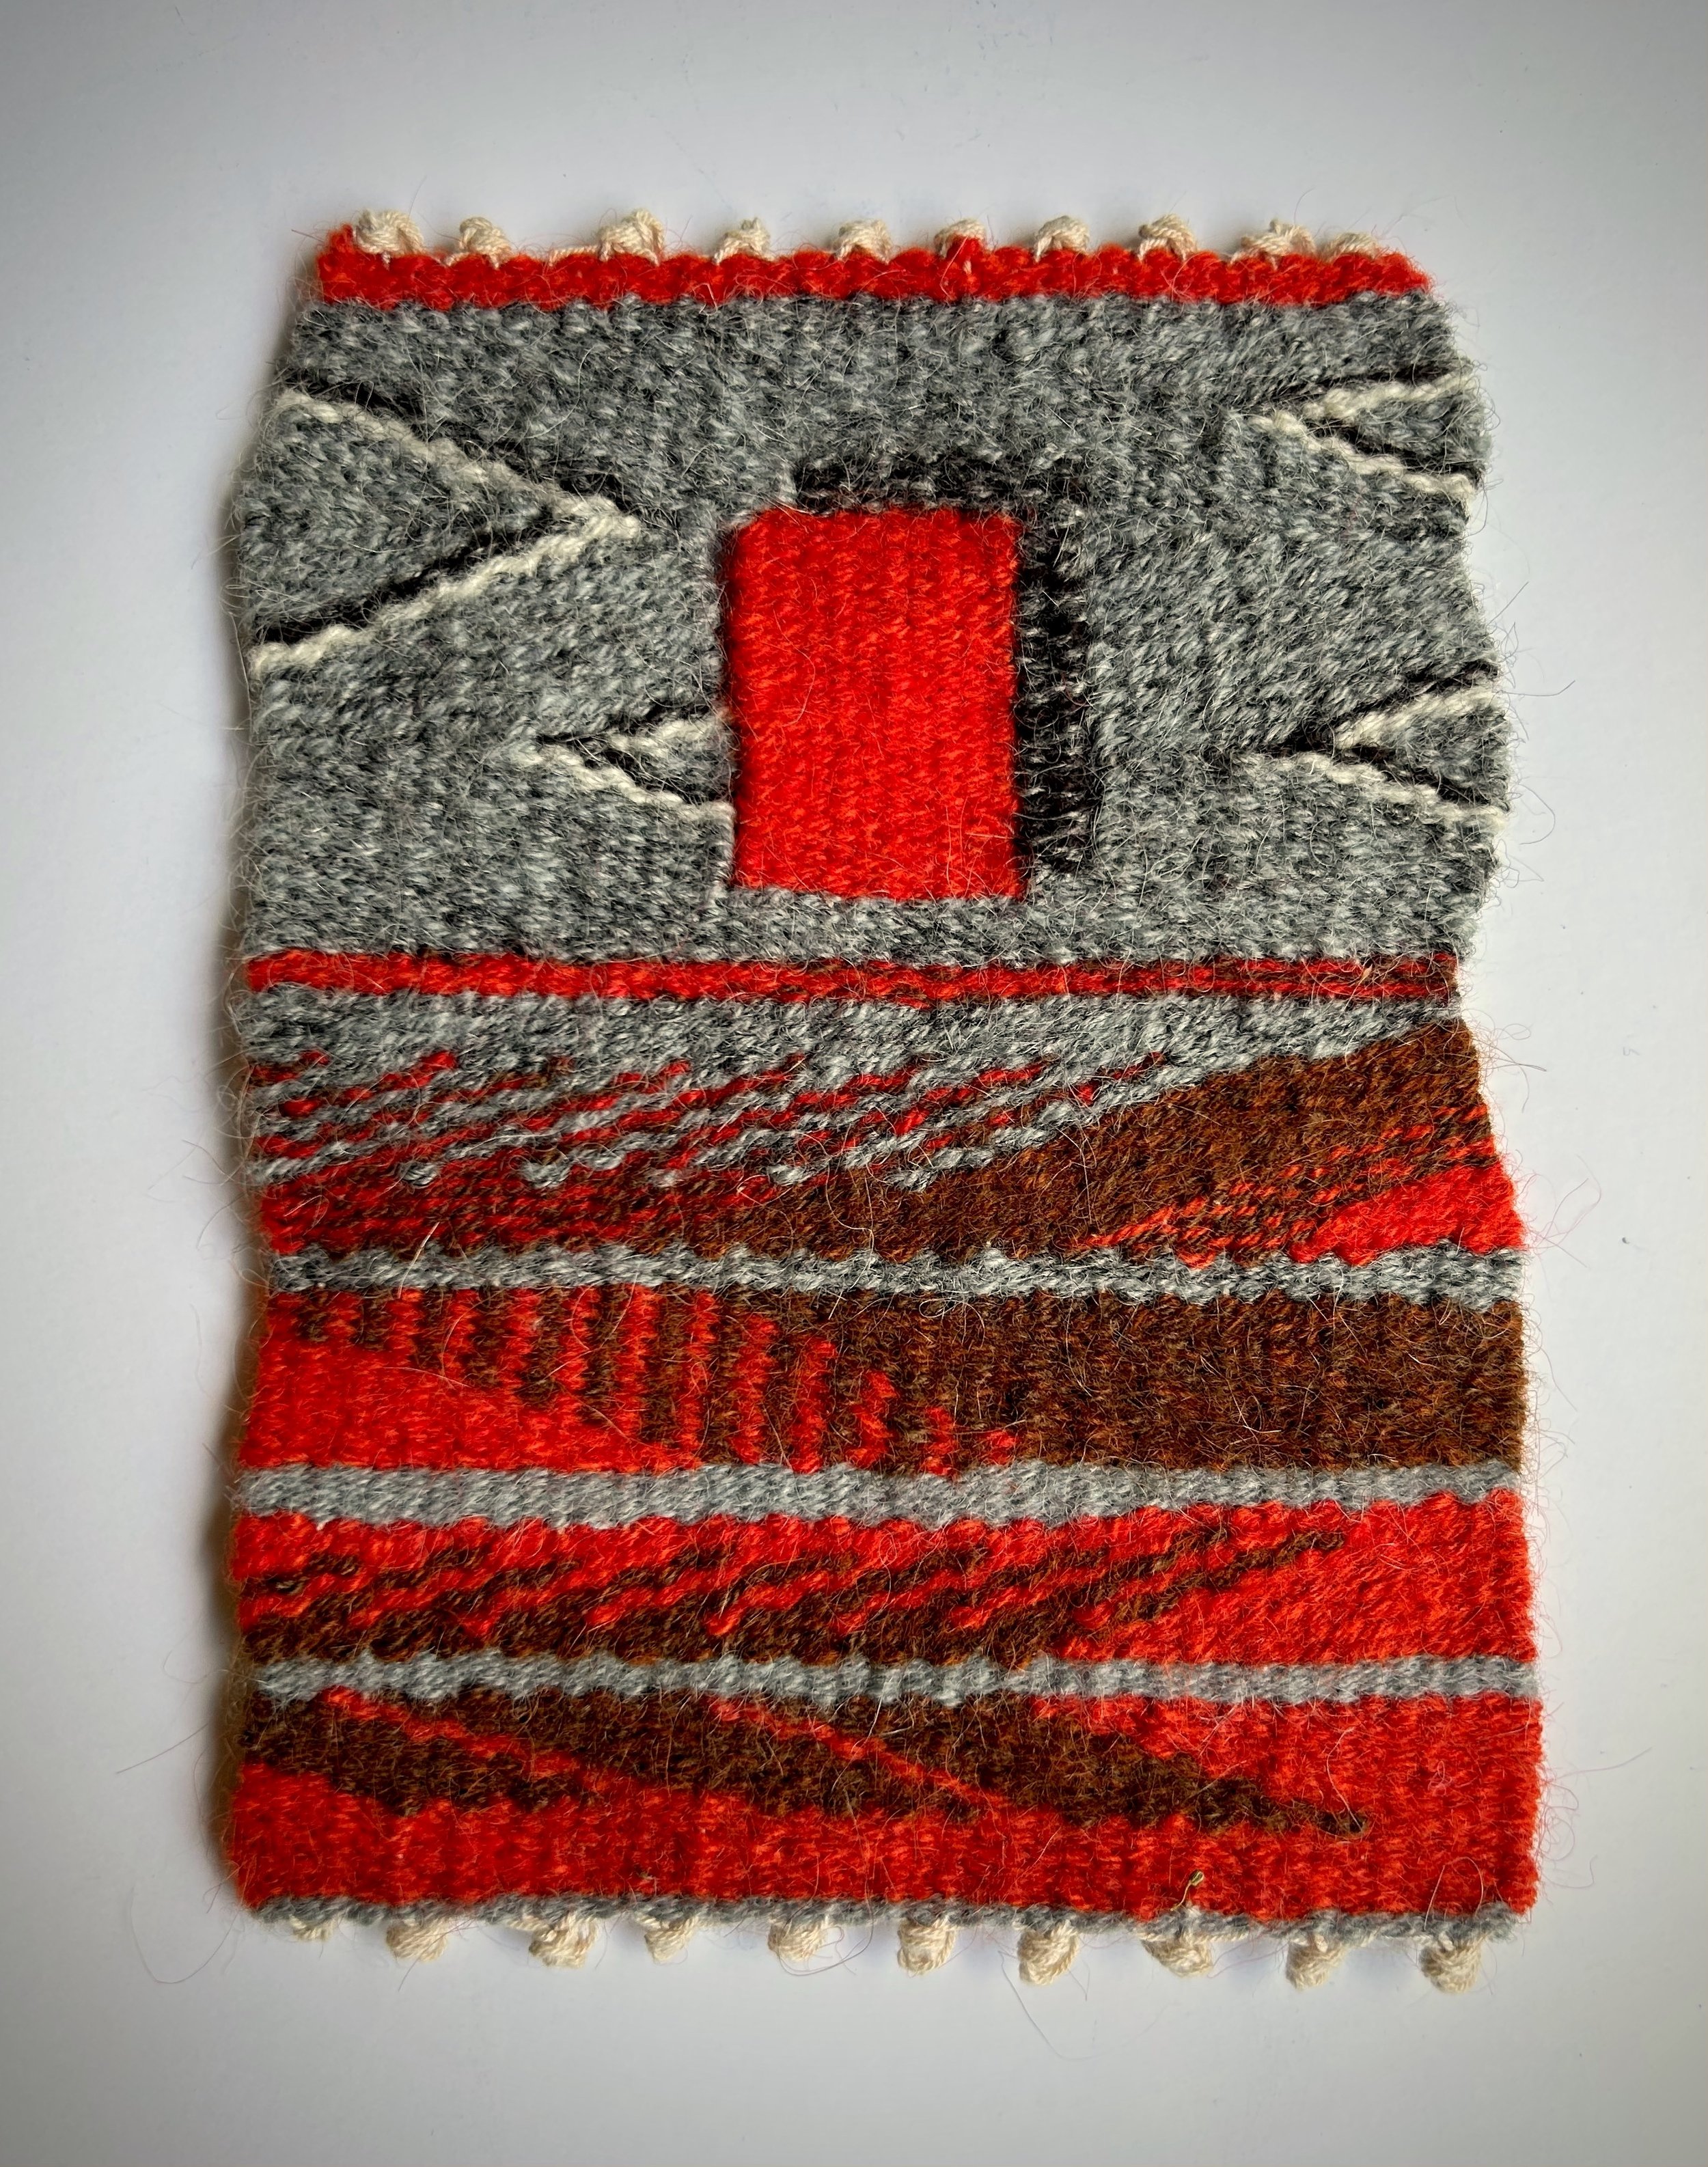   Doorway , 2021. Cotton warp and wool weft. 5.5” x 7.25”. Woven using eccentric weft tapestry techniques. 